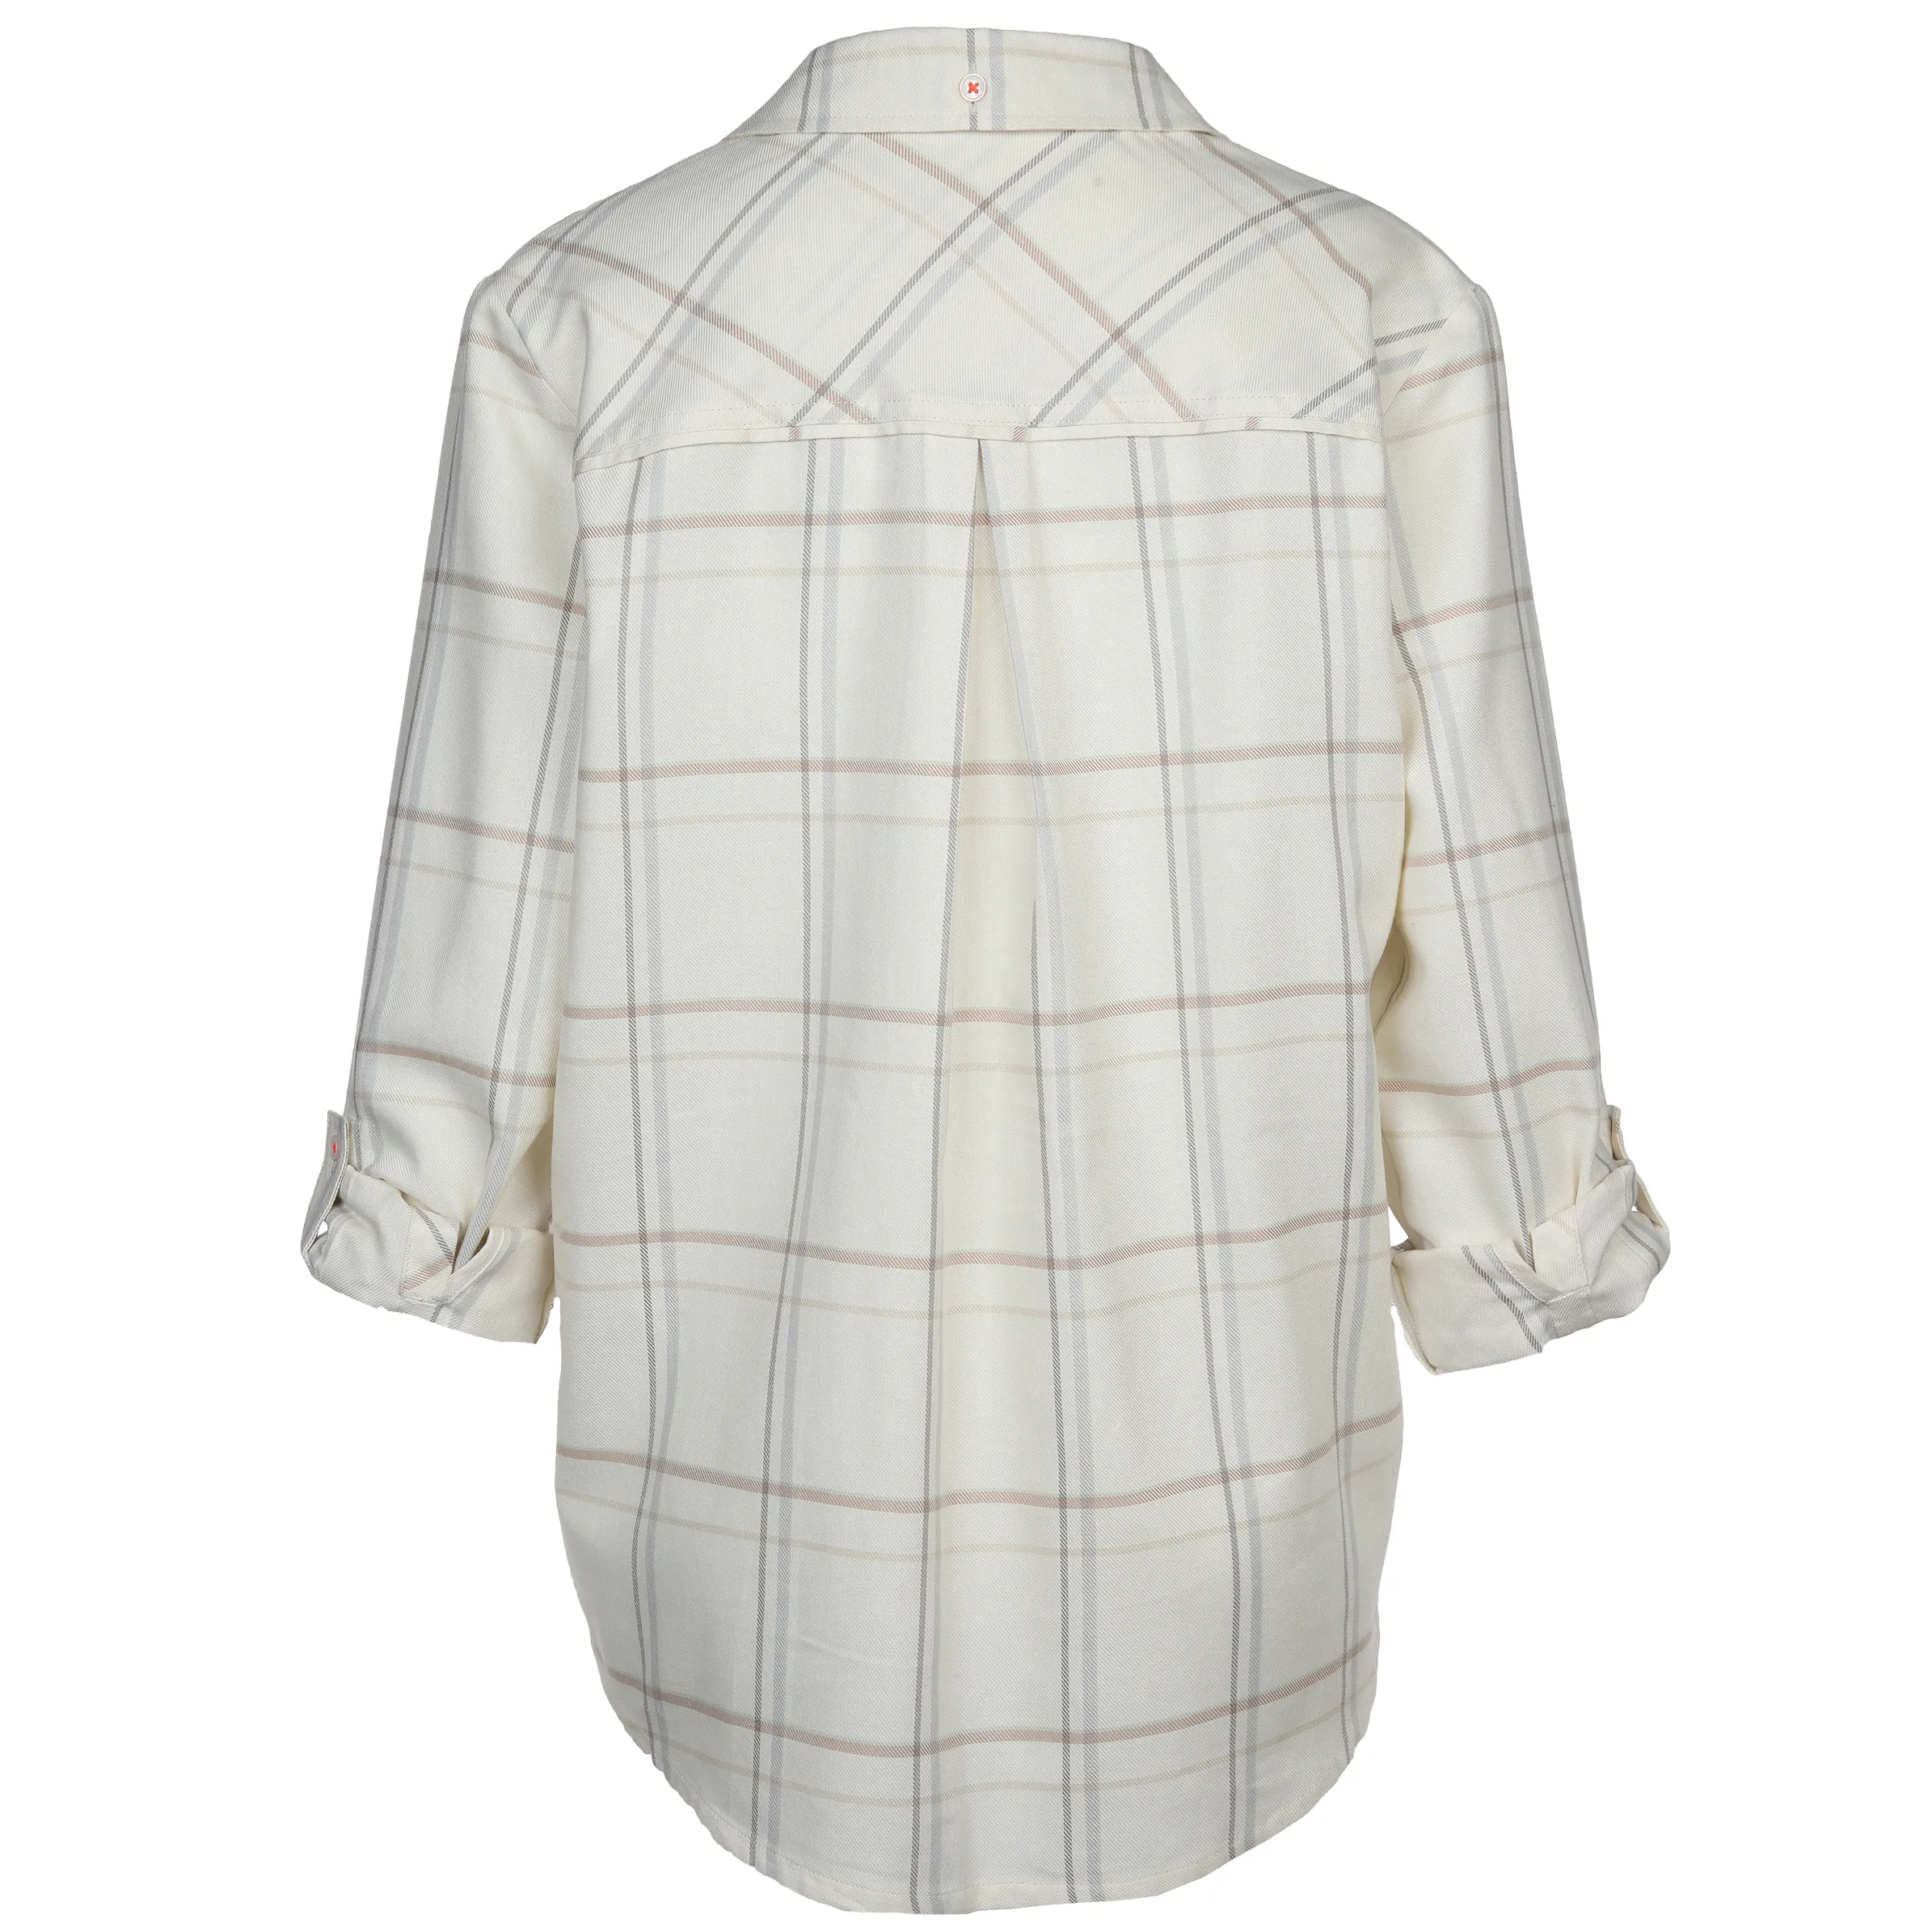 Cecil B344198 TOS Cozy Check Blouse Weiß 888527 33209 2